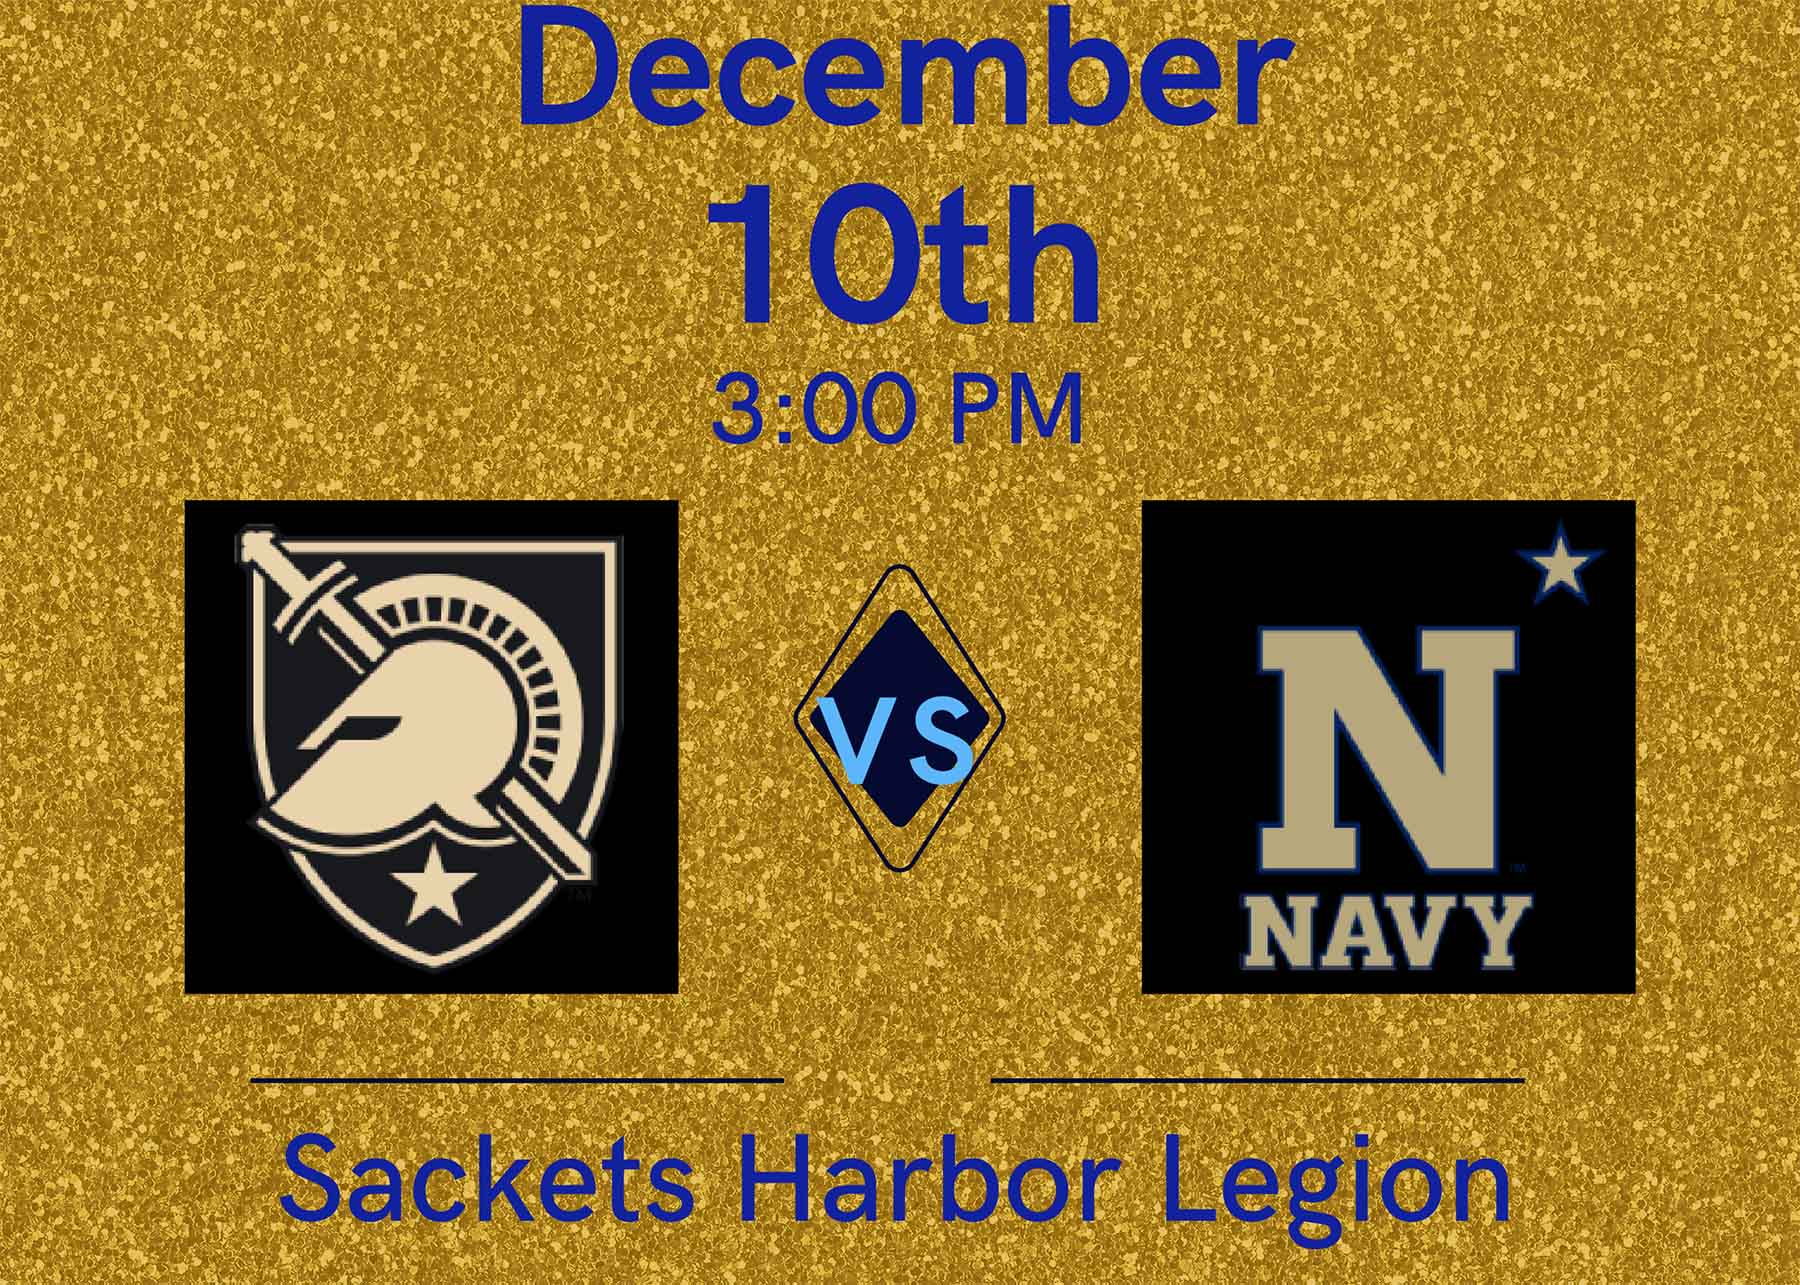 Portion of the American Legion's flyer for the Army vs Navy Game Watch